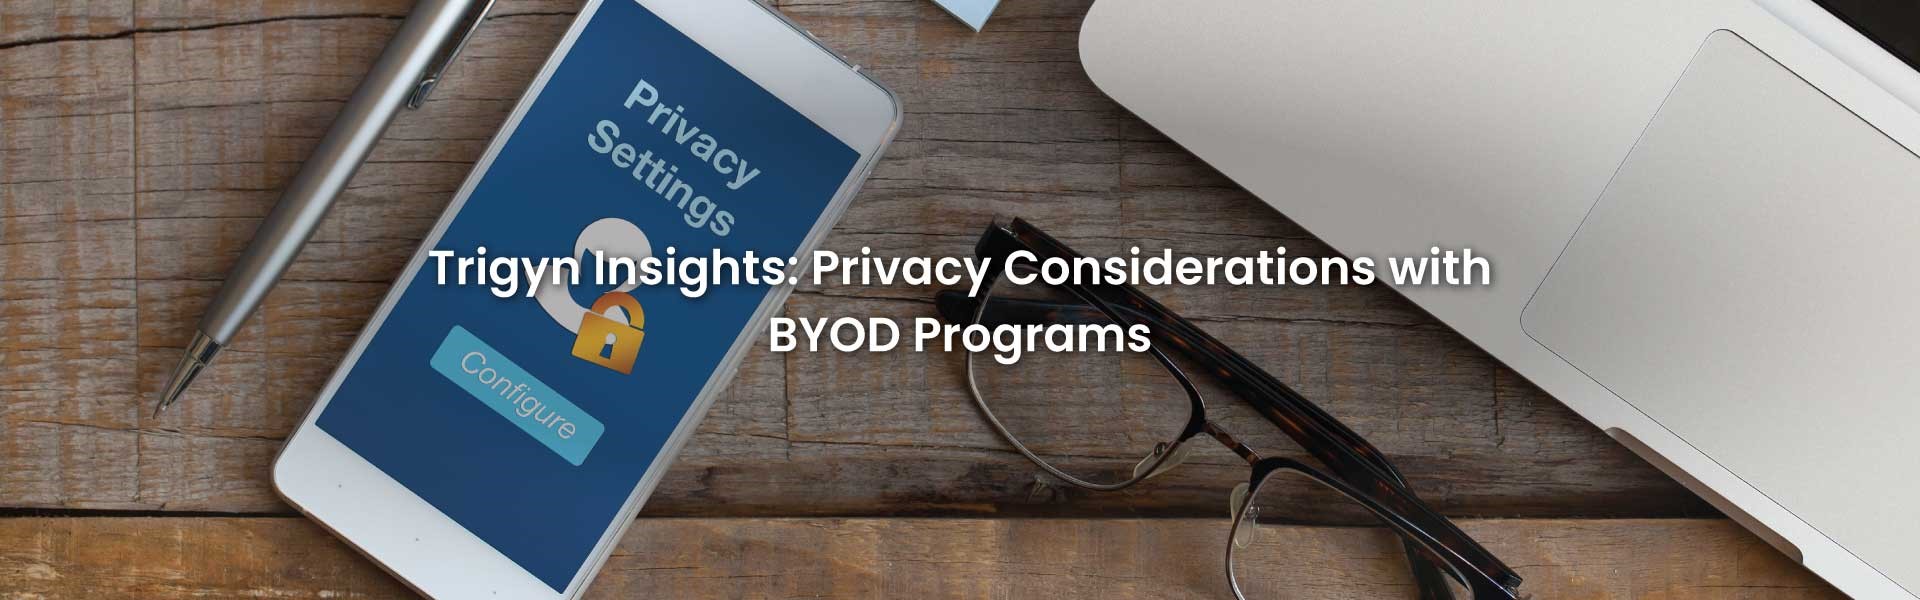 Privacy with BYOD Programs